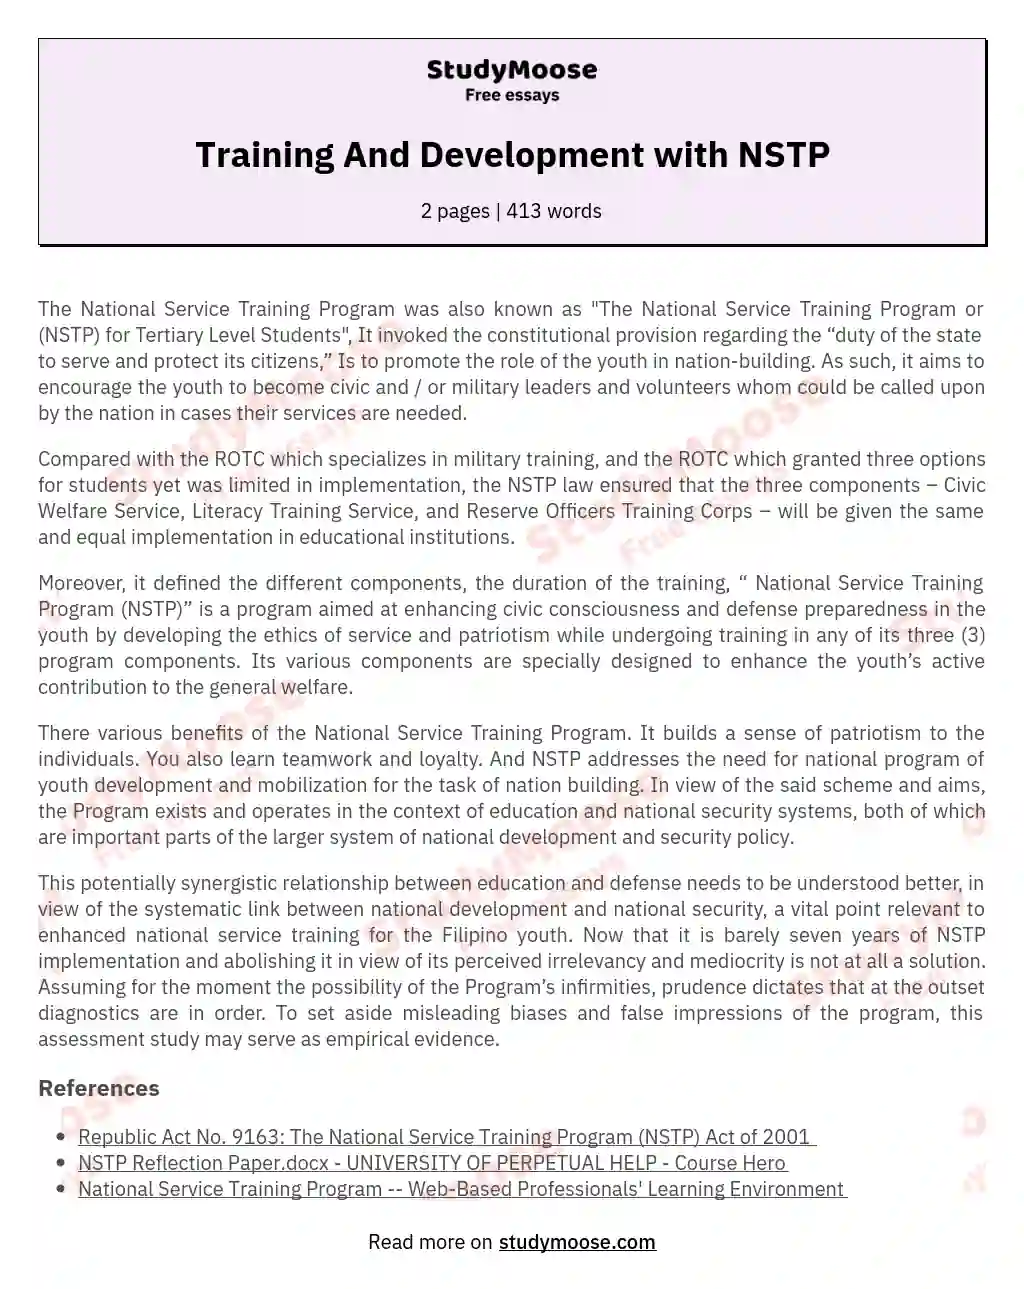 Training And Development with NSTP essay